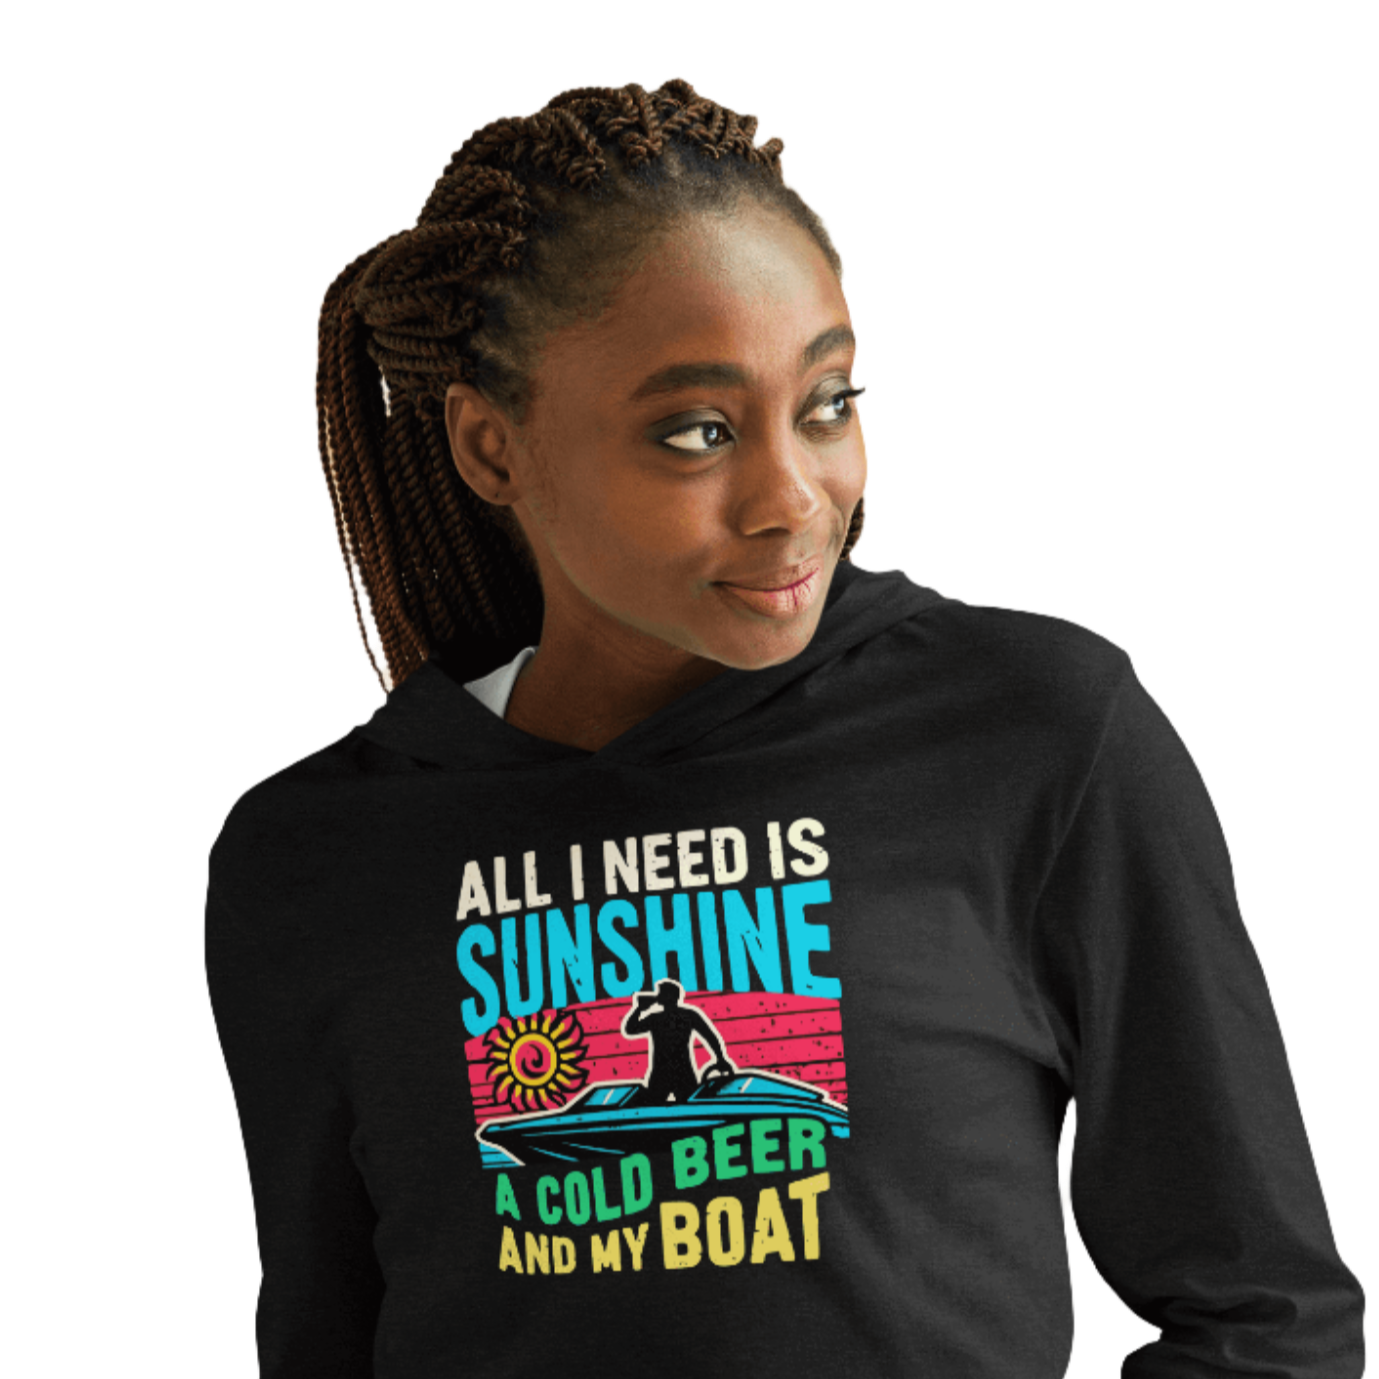 Lightweight hoodie featuring "All I Need Is Sunshine, a Cold Beer, and My Boat" with a retro sunset and a man in a boat.